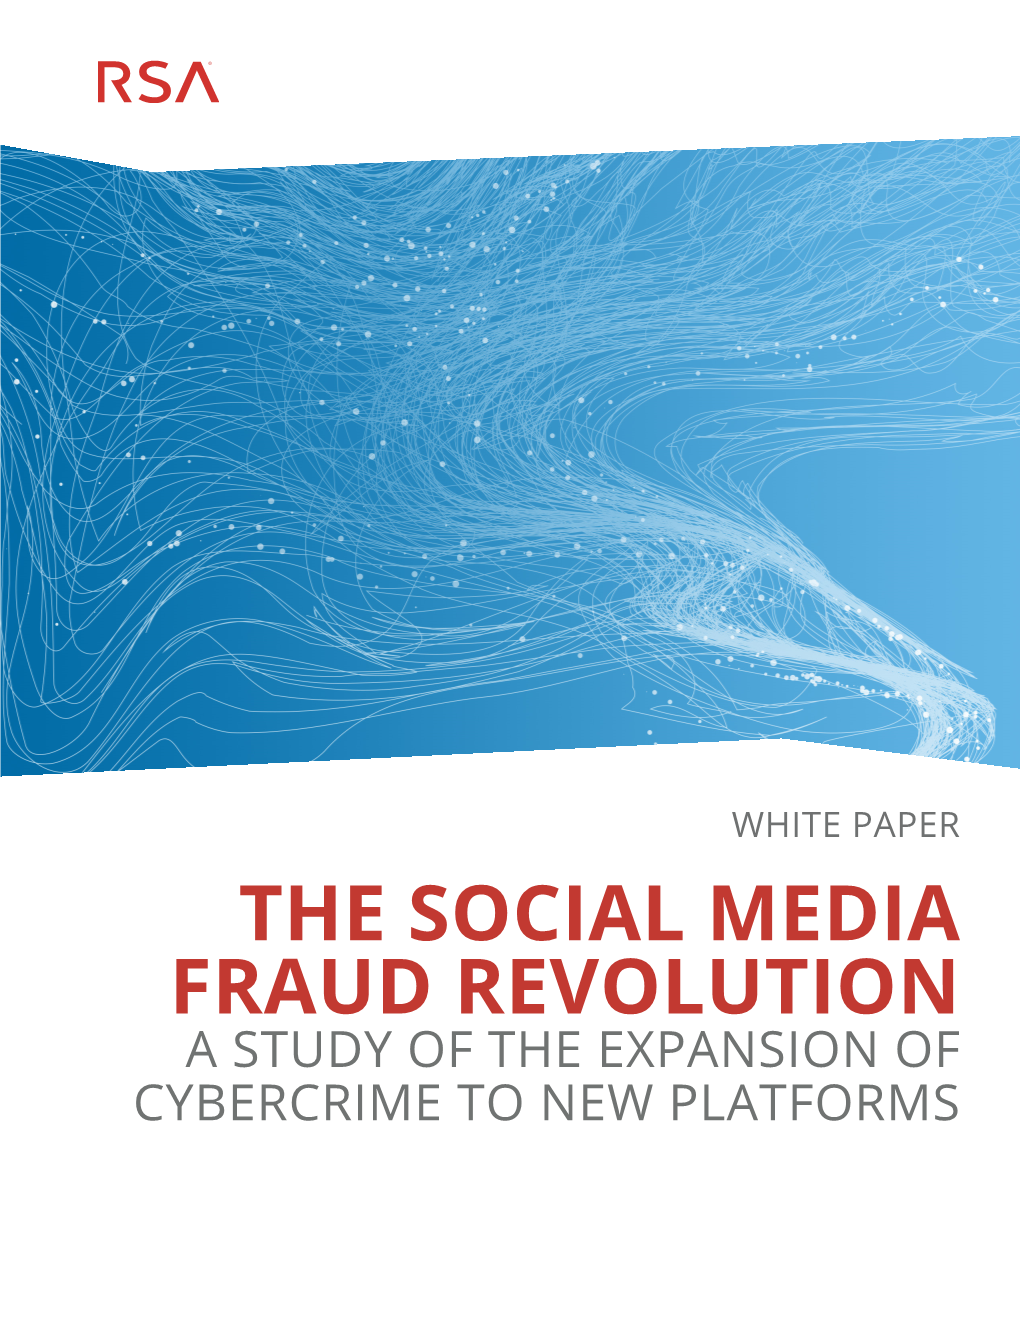 The Social Media Fraud Revolution a Study of the Expansion of Cybercrime to New Platforms White Paper